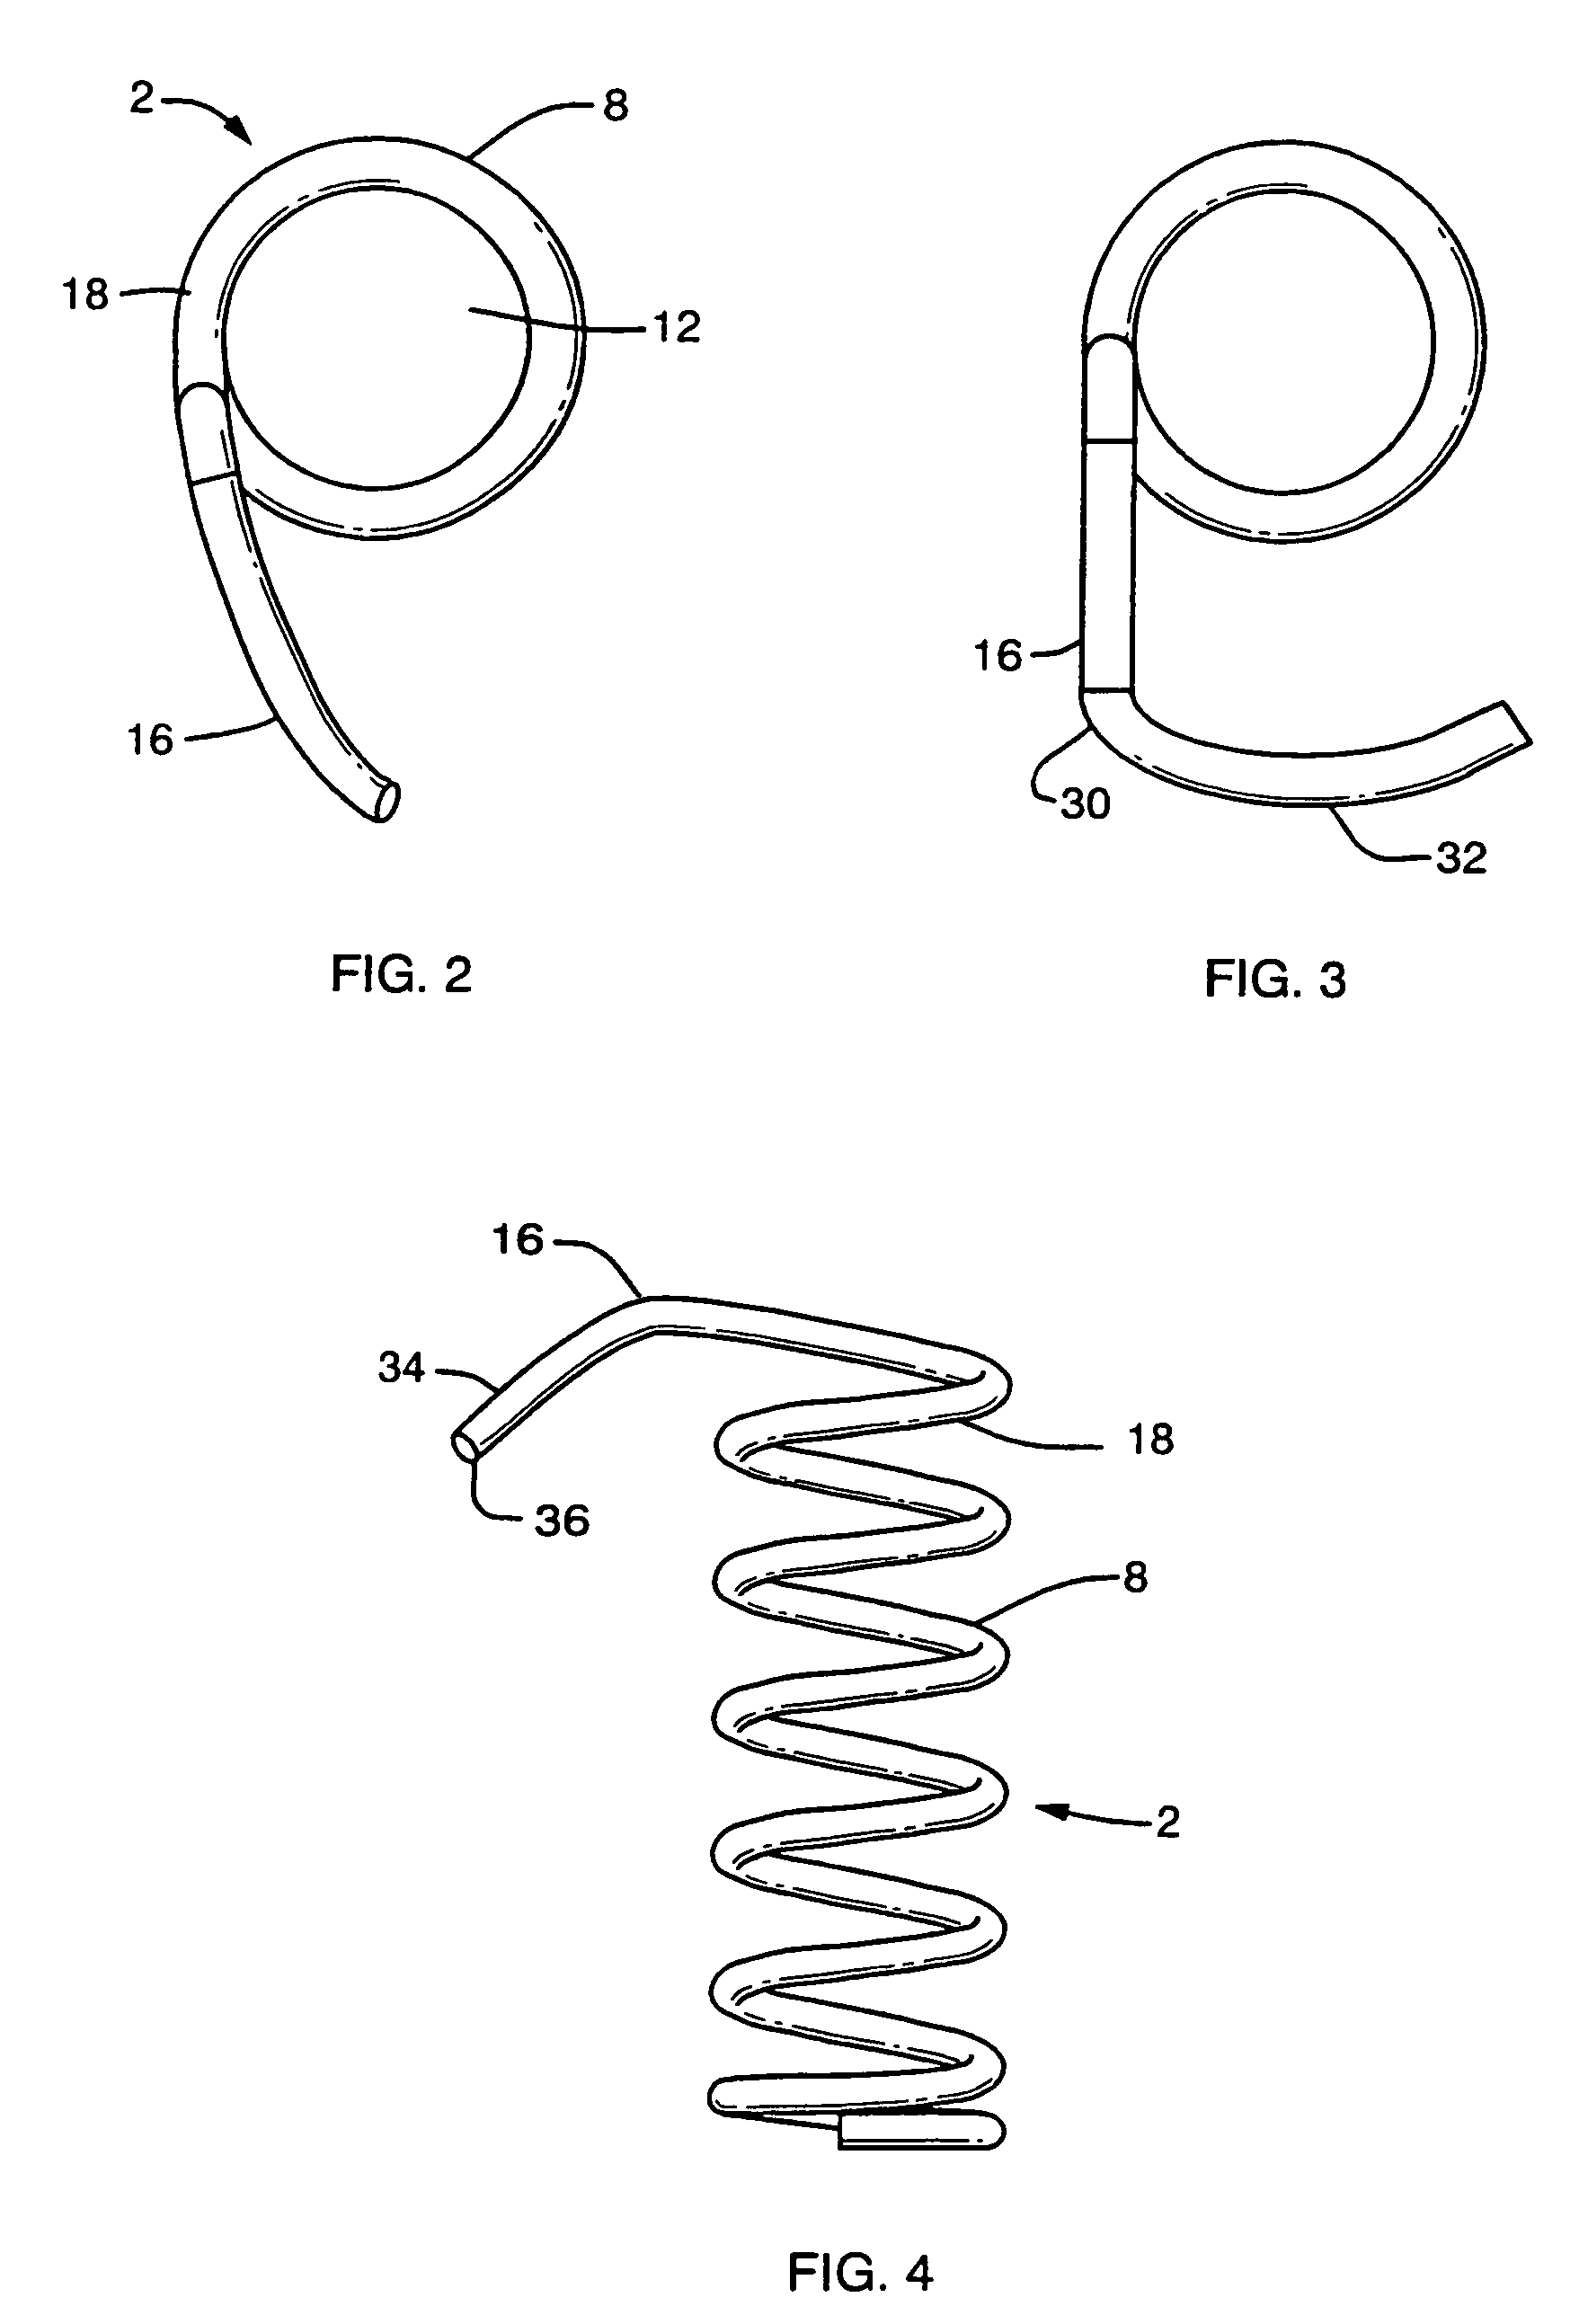 Implant anchor systems